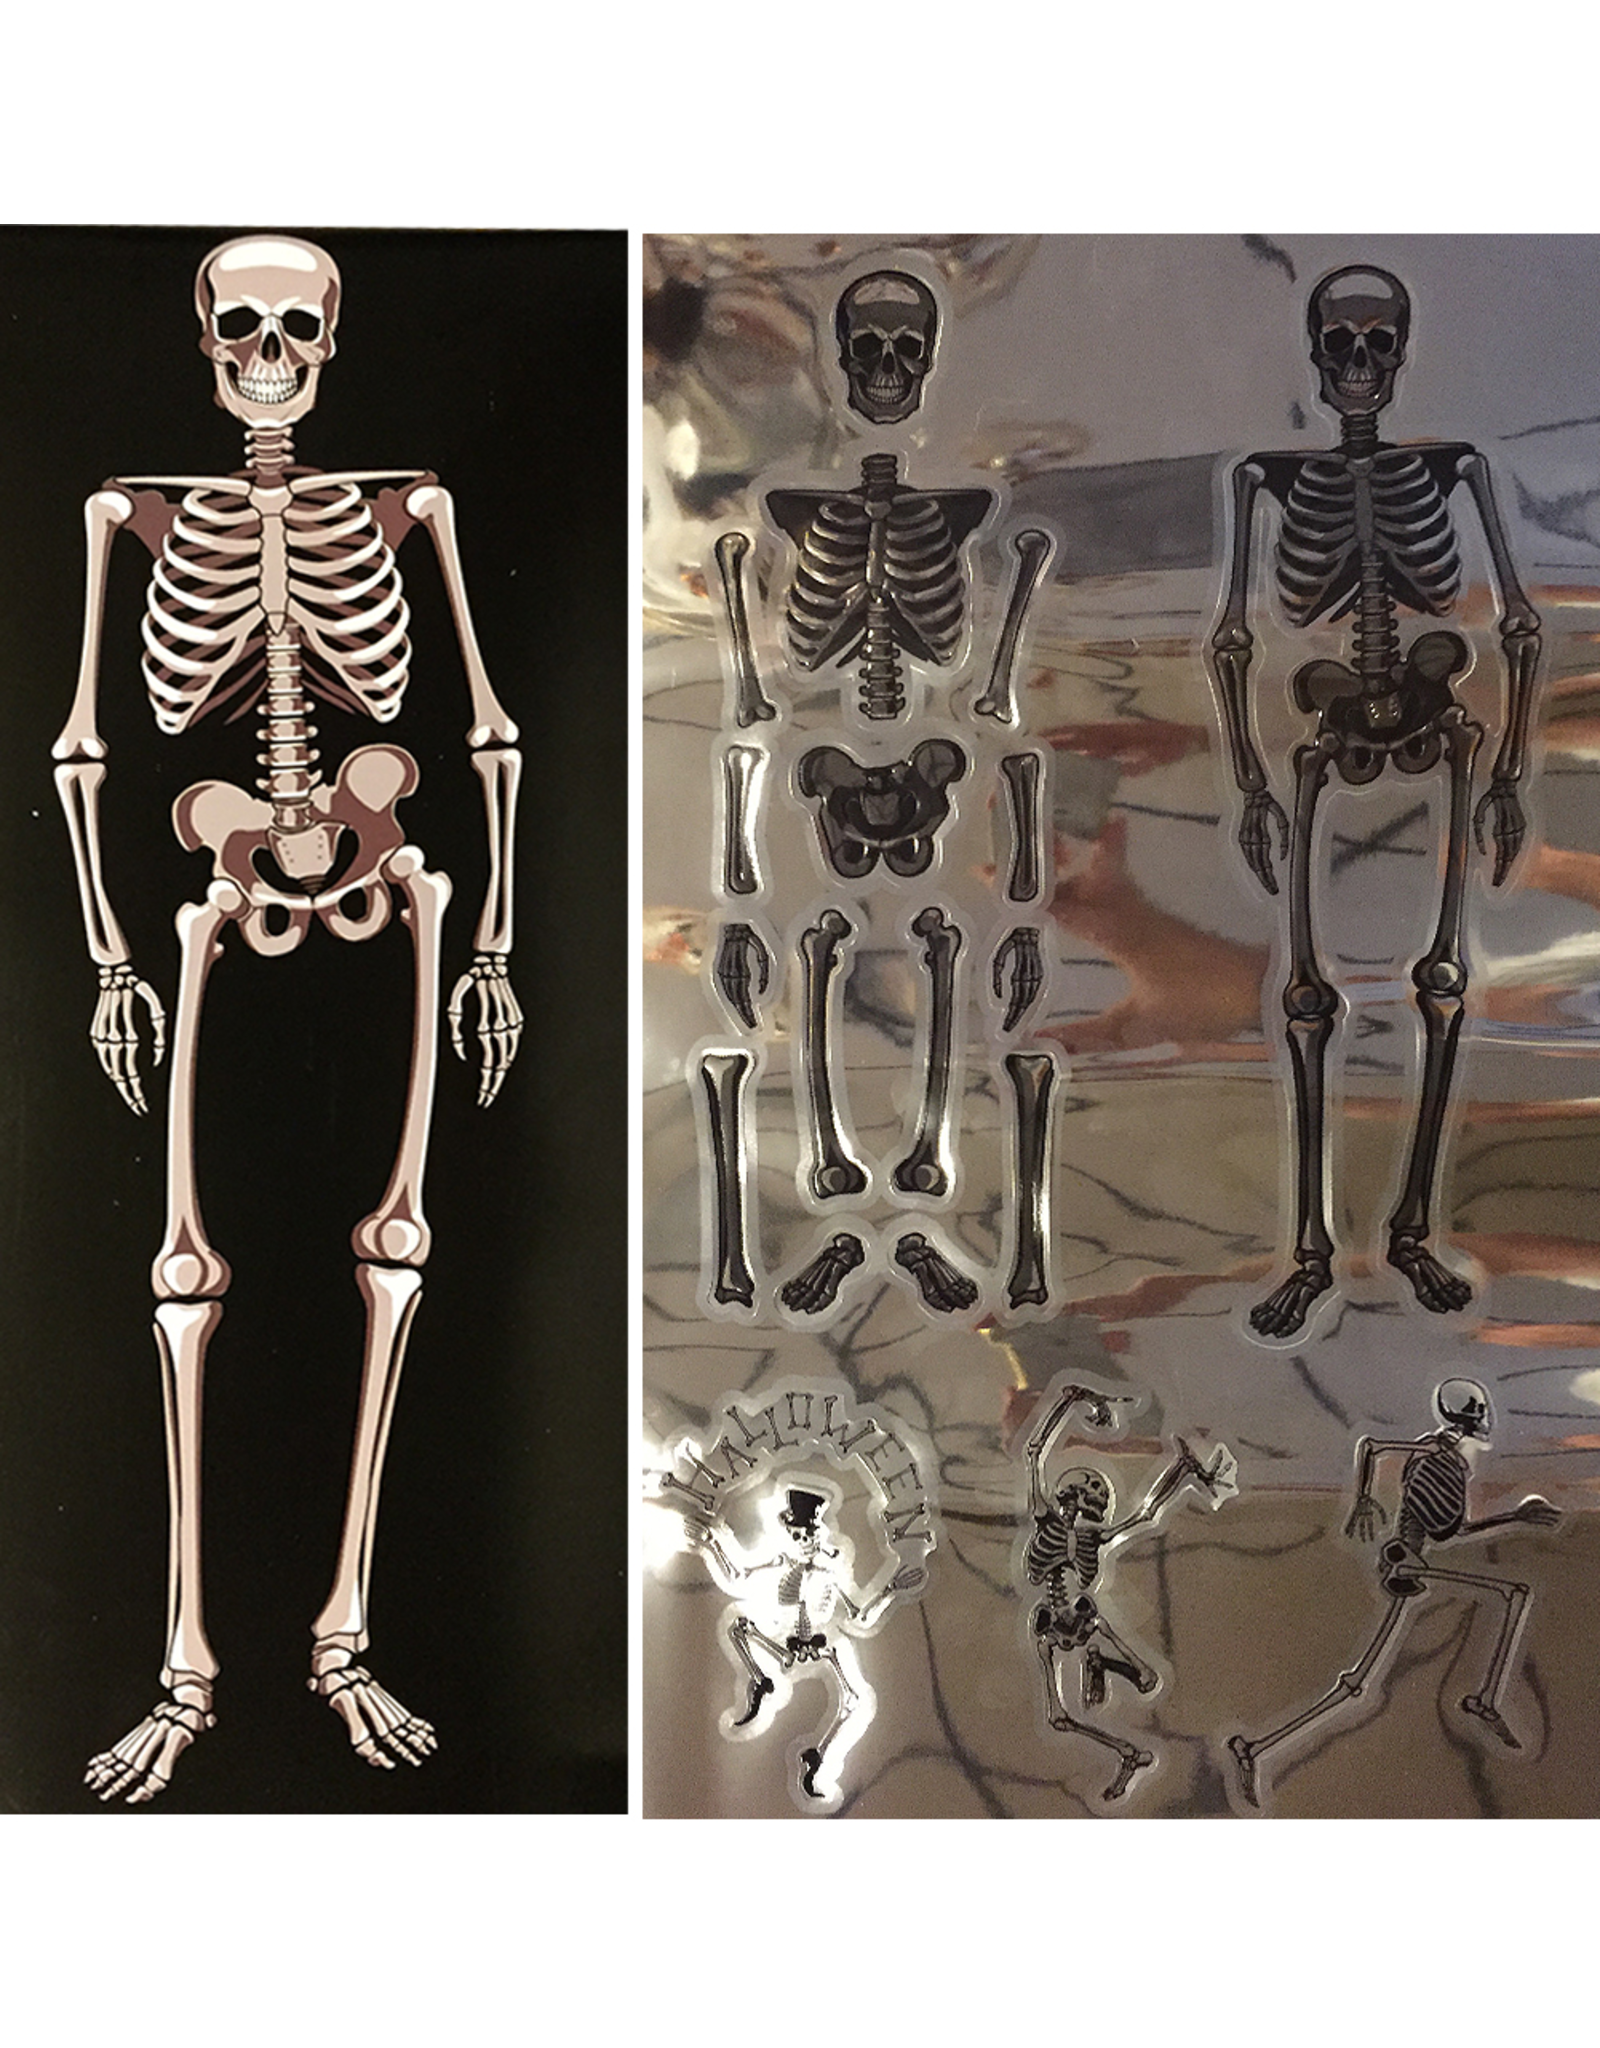 Darice Halloween Wall Art Decals Mirror Skeletons 5 Assorted Sizes and Styles